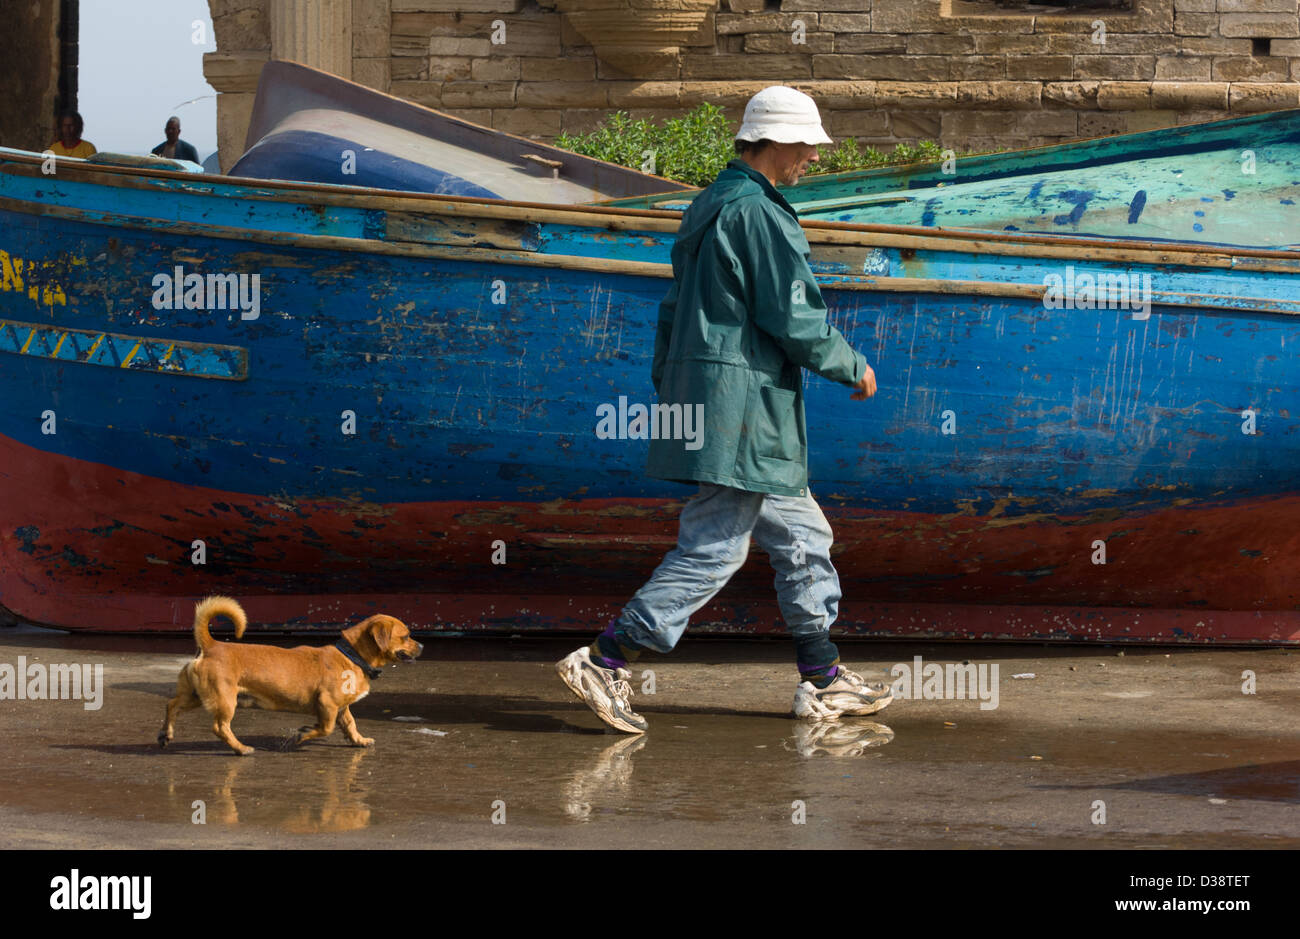 Fisherman being followed by a dog, walking past a traditional blue fishing boat on the side of Essaouira Harbour, Essaouira, Morocco Stock Photo